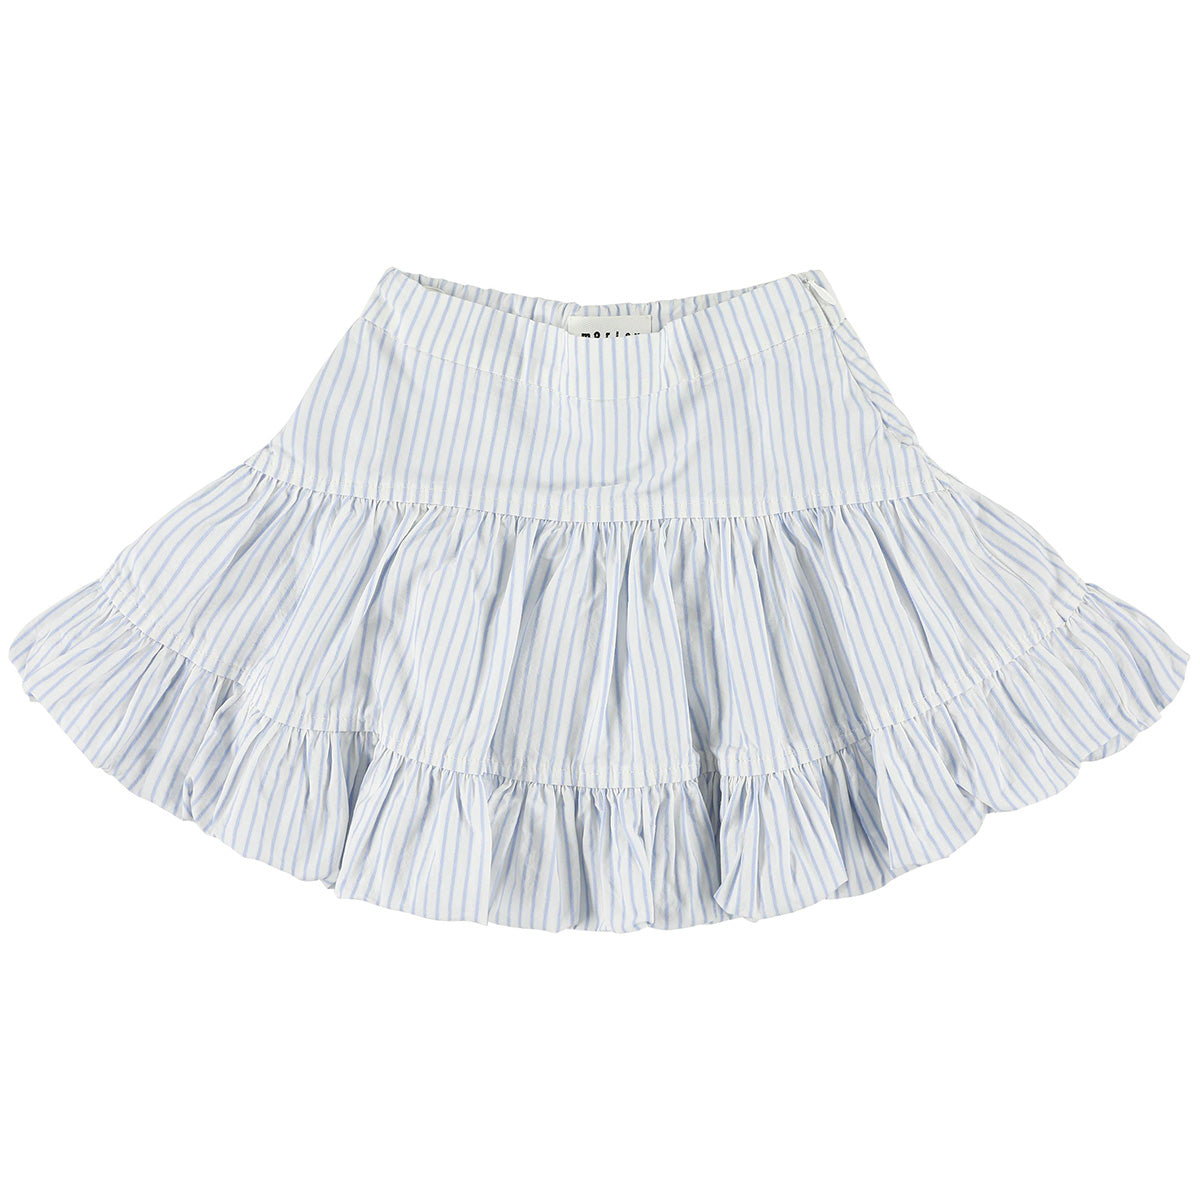 The Ultra Skirt from Morley. Double-faced cotton poplin skirt. Stripes and gathering throughout.